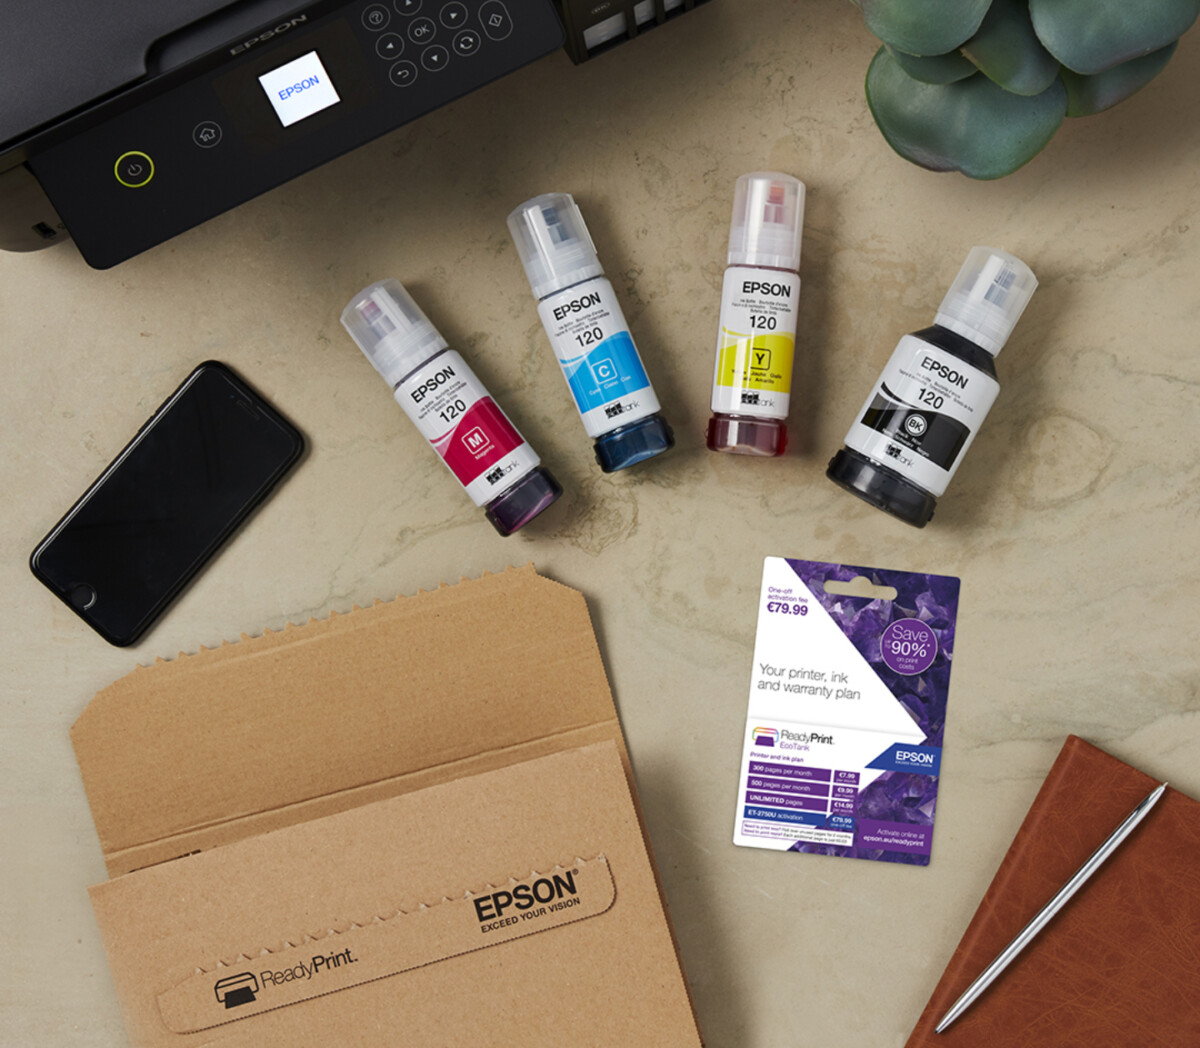 Epson ReadyPrint: this subscription allows you to forget the chore of ink cartridge